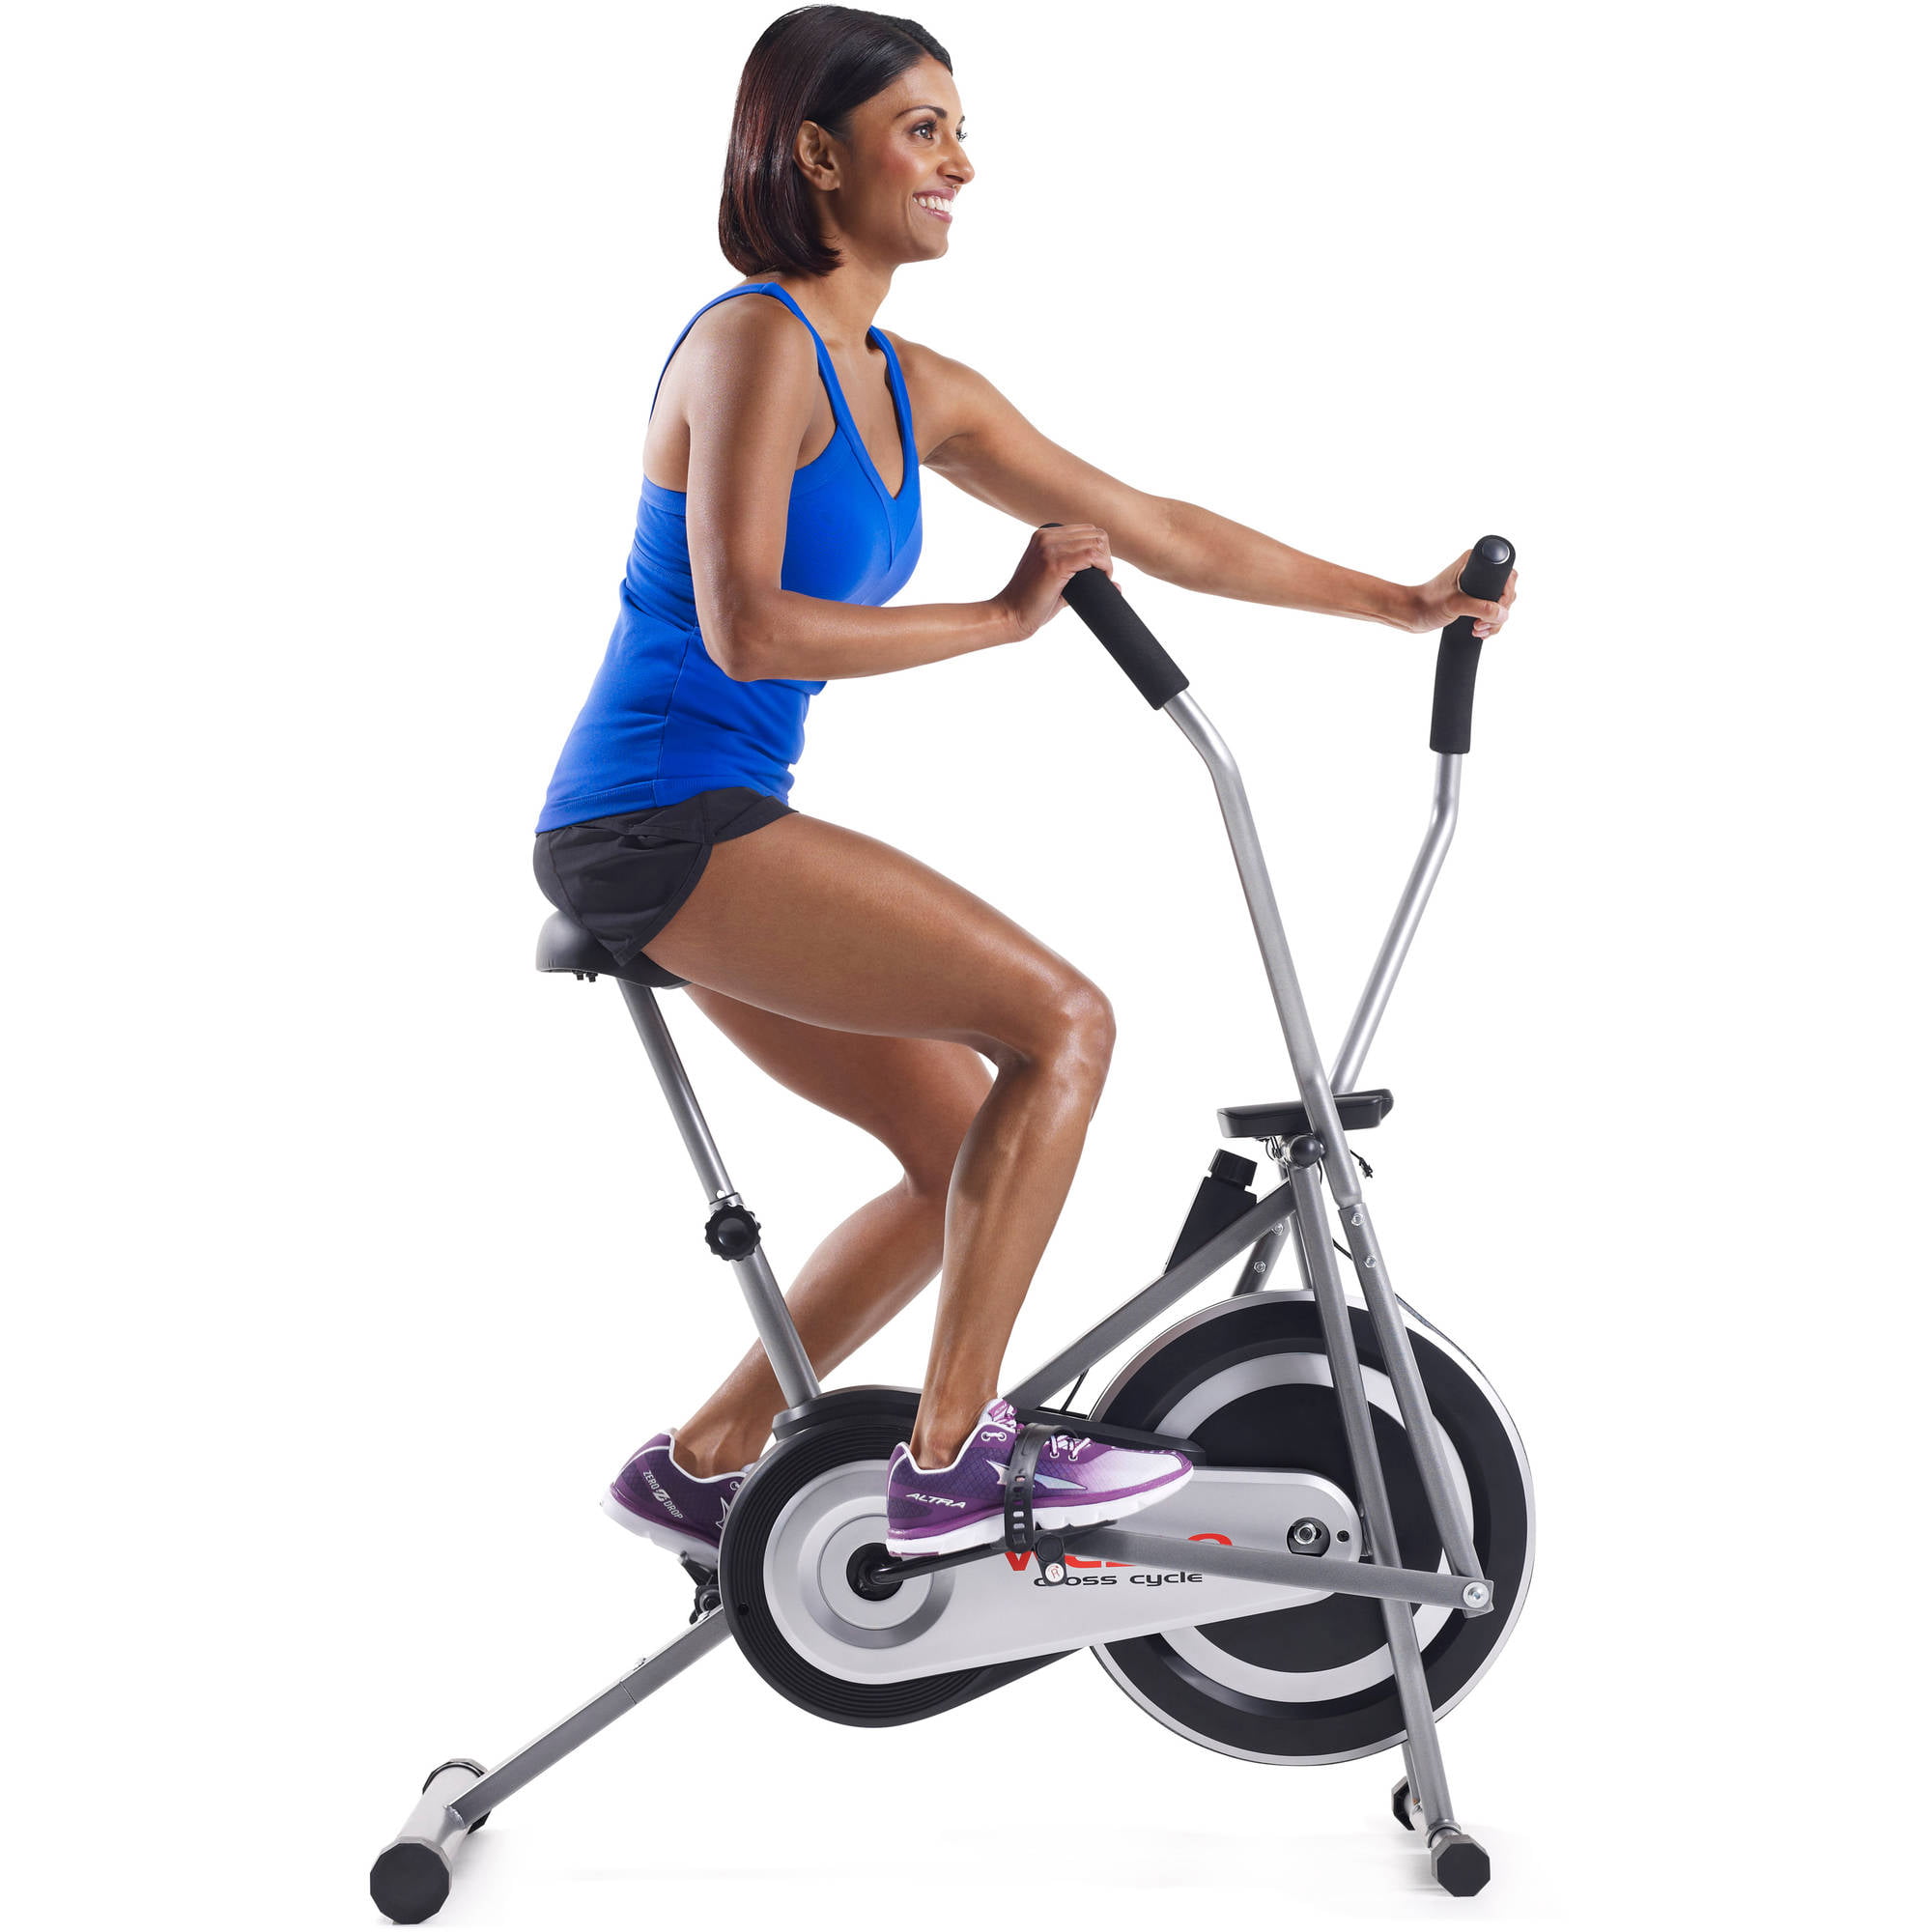 Weslo Cross Cycle Upright Exercise Bike Walmart with regard to arm cycling benefits regarding House